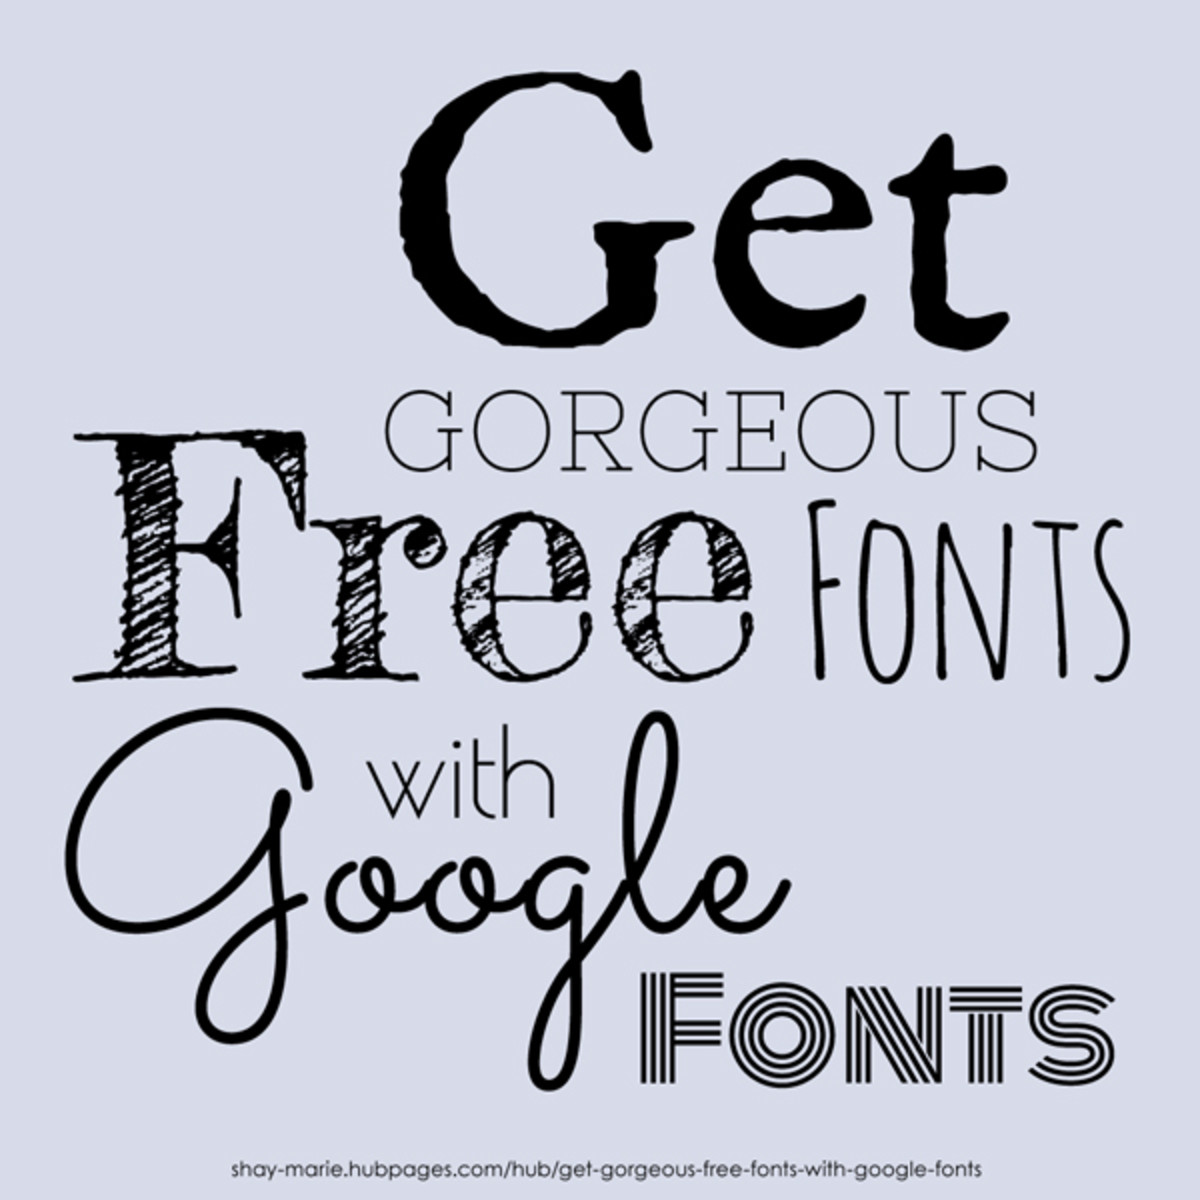 Get Gorgeous Free Fonts with Google Fonts